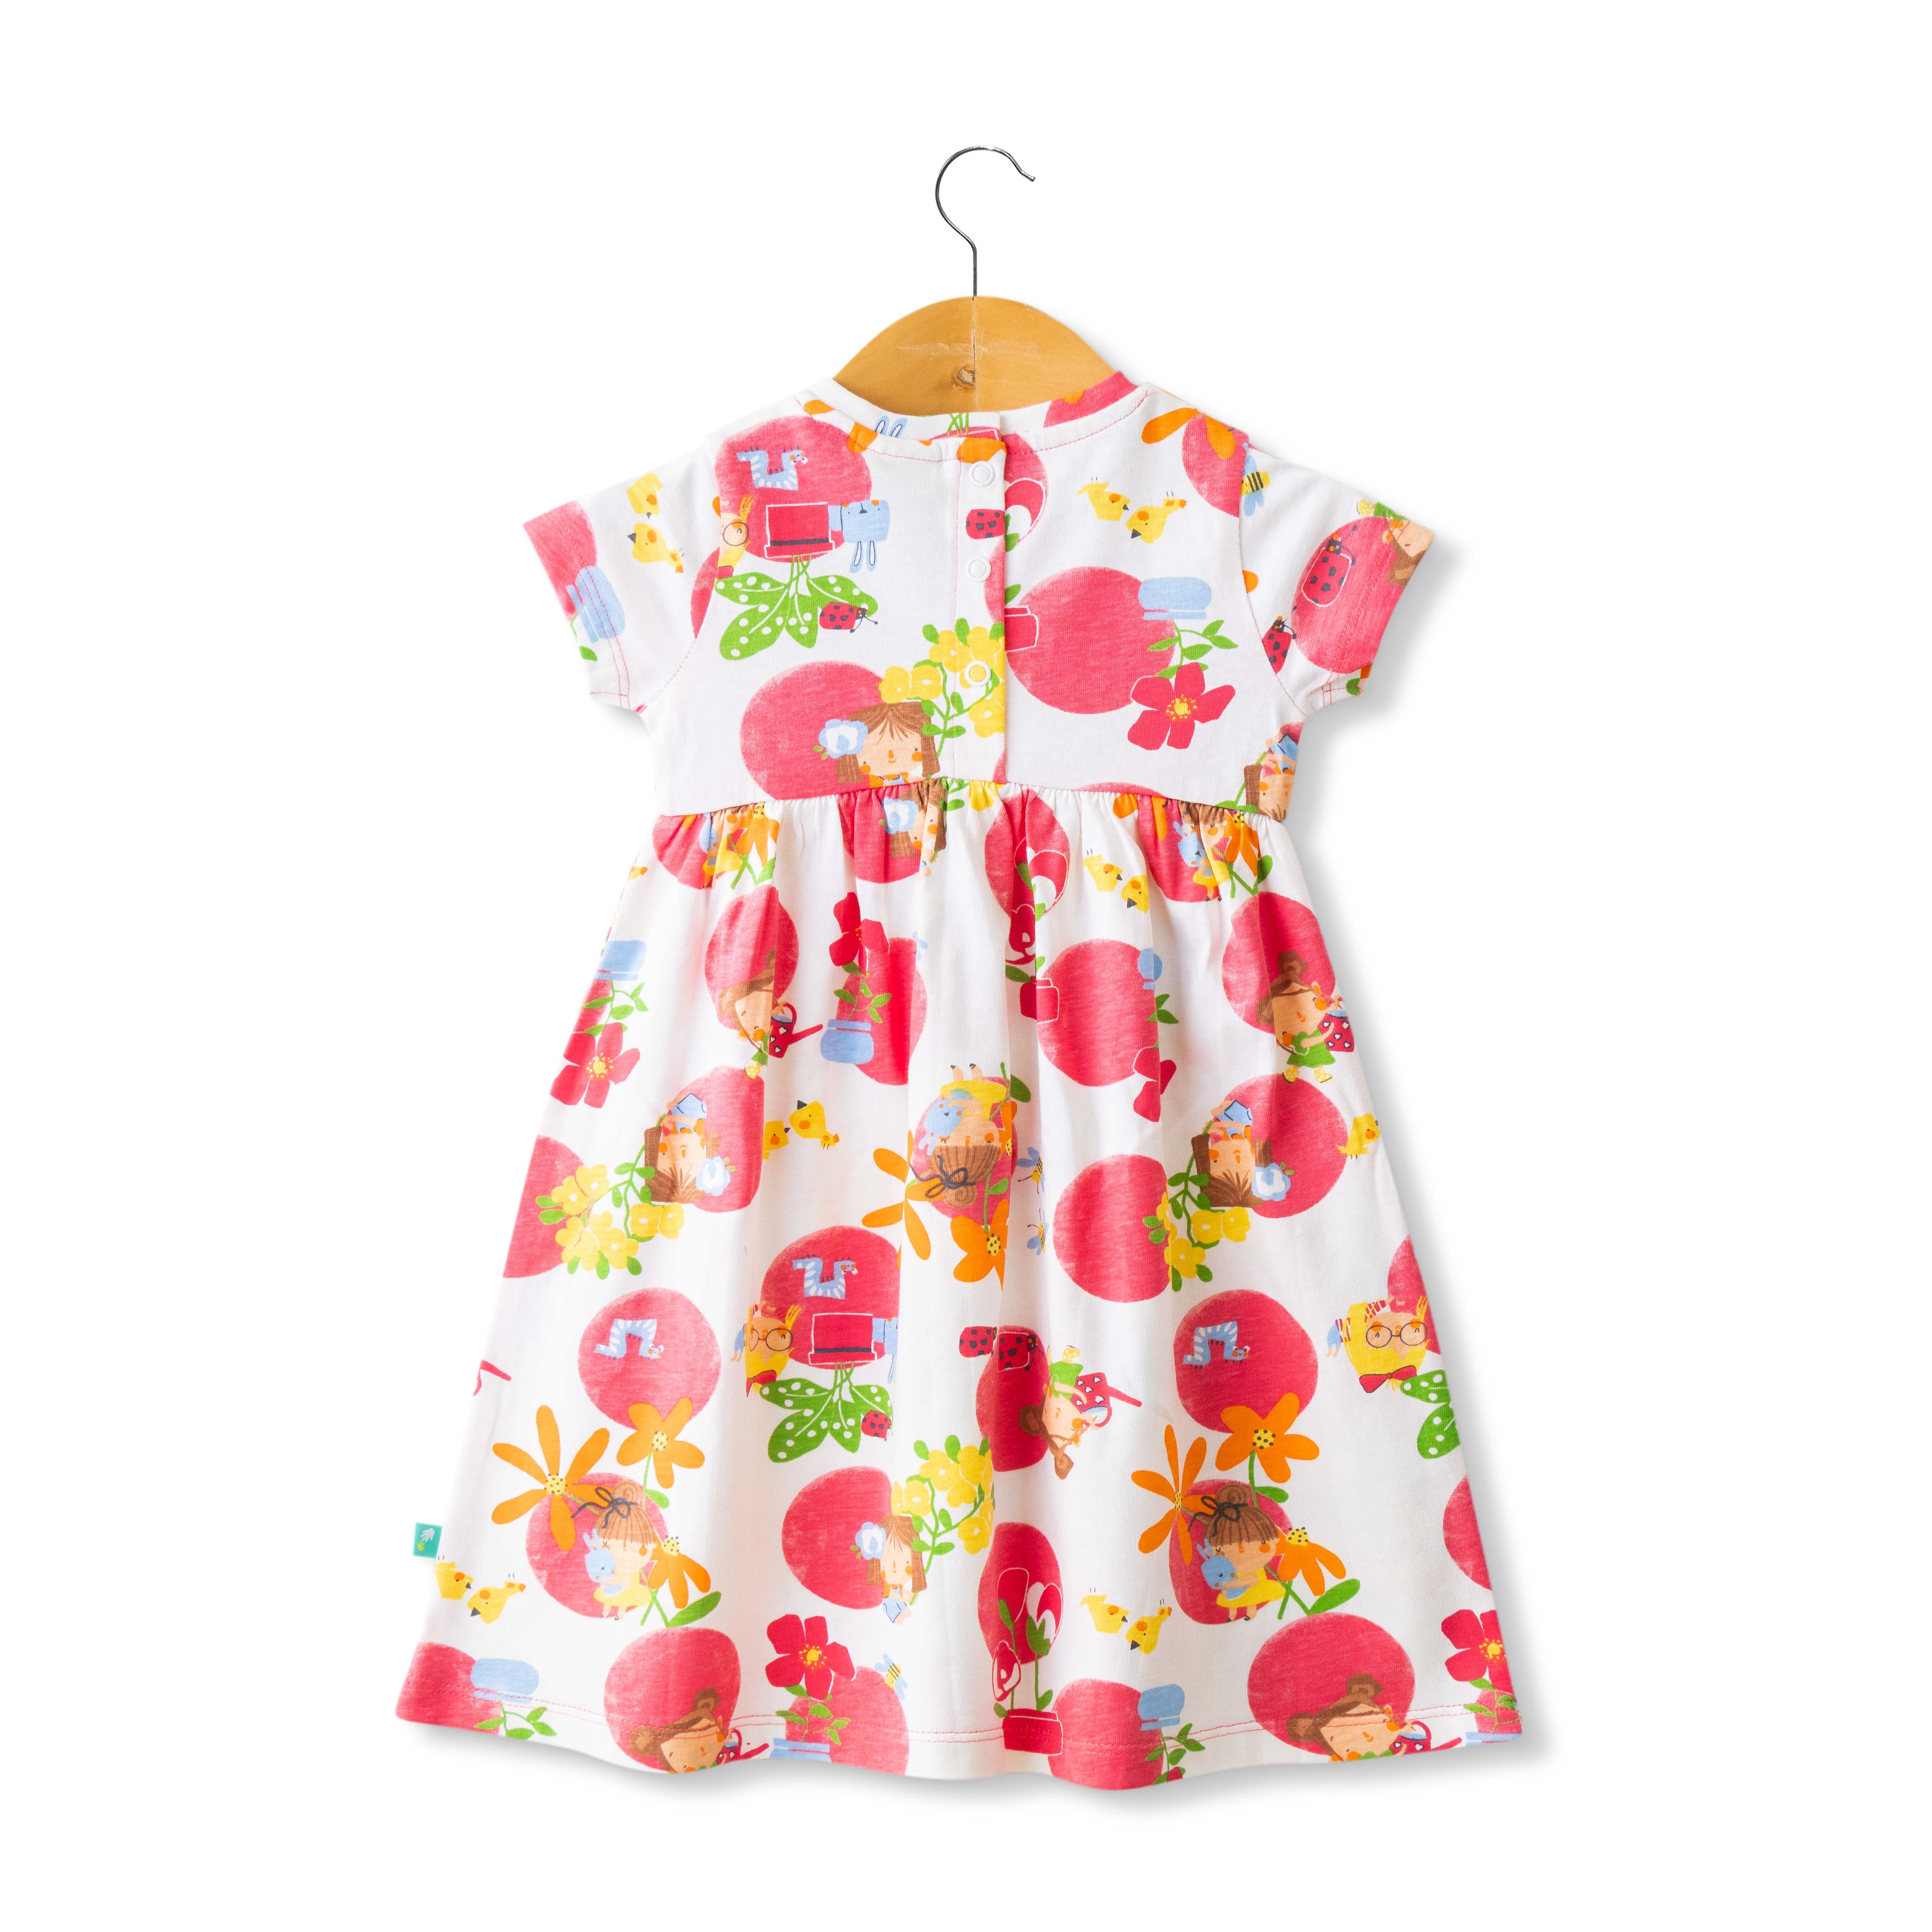 Baby Girls Dark Color All Over Printed Below Knee Casual Dress - White